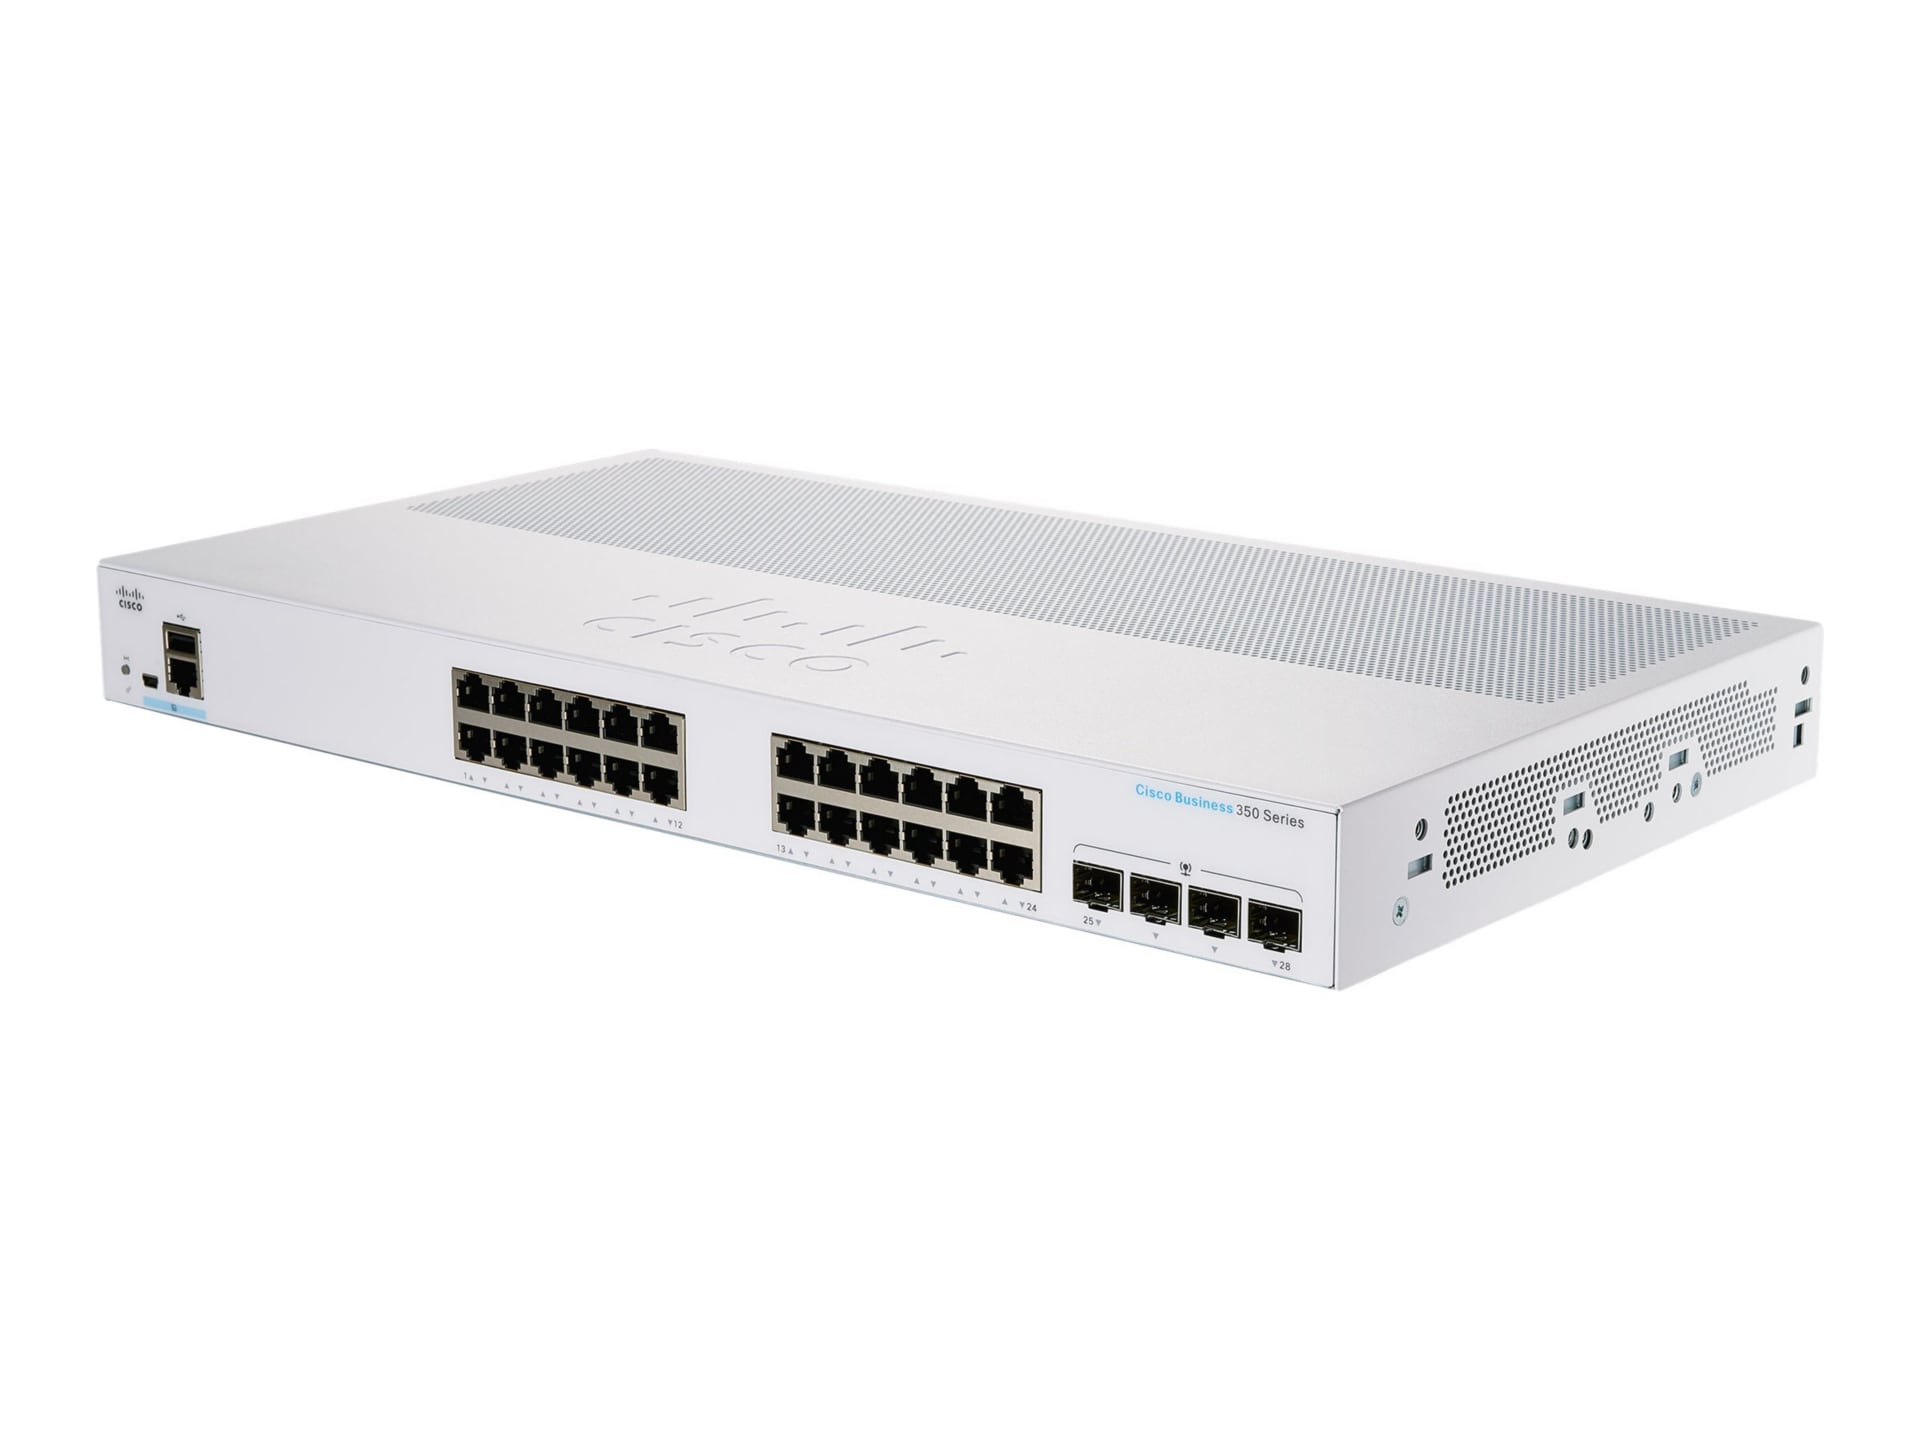 Cisco Business 350 Series CBS350-24T-4X - switch - 24 ports - managed - rack-mountable